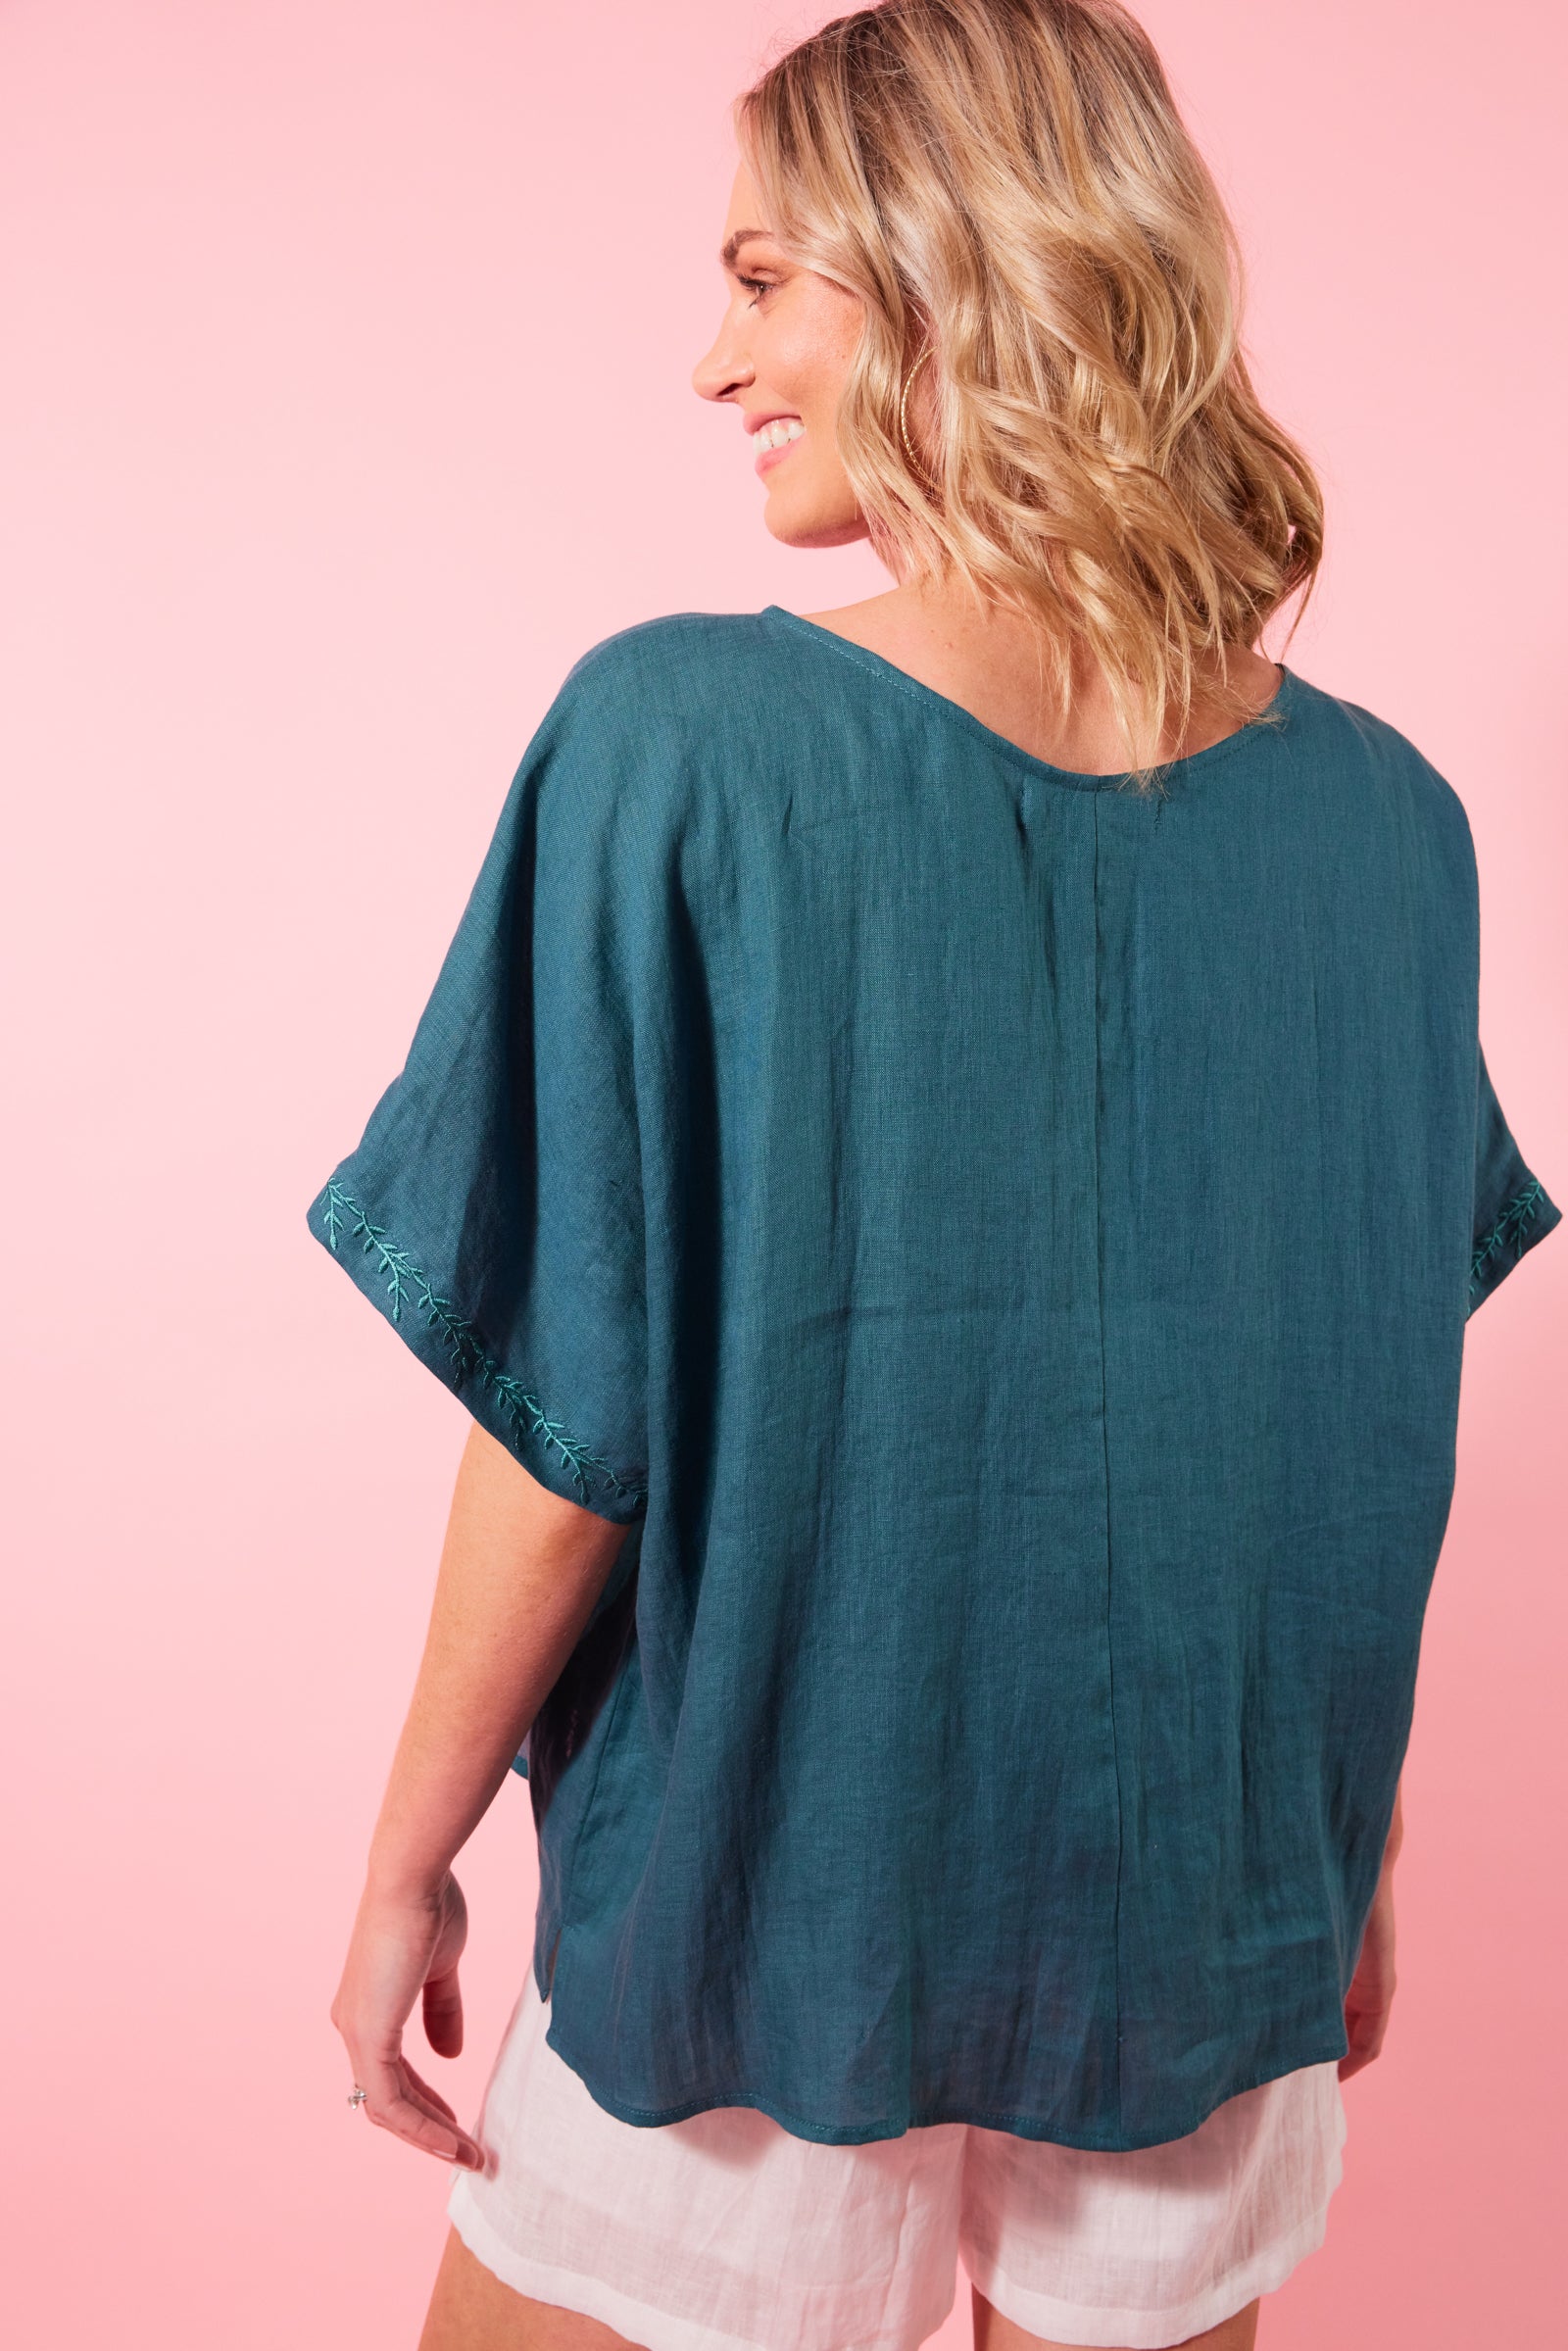 Gala Relax Top - Teal - Isle of Mine Clothing - Top One Size Ramie